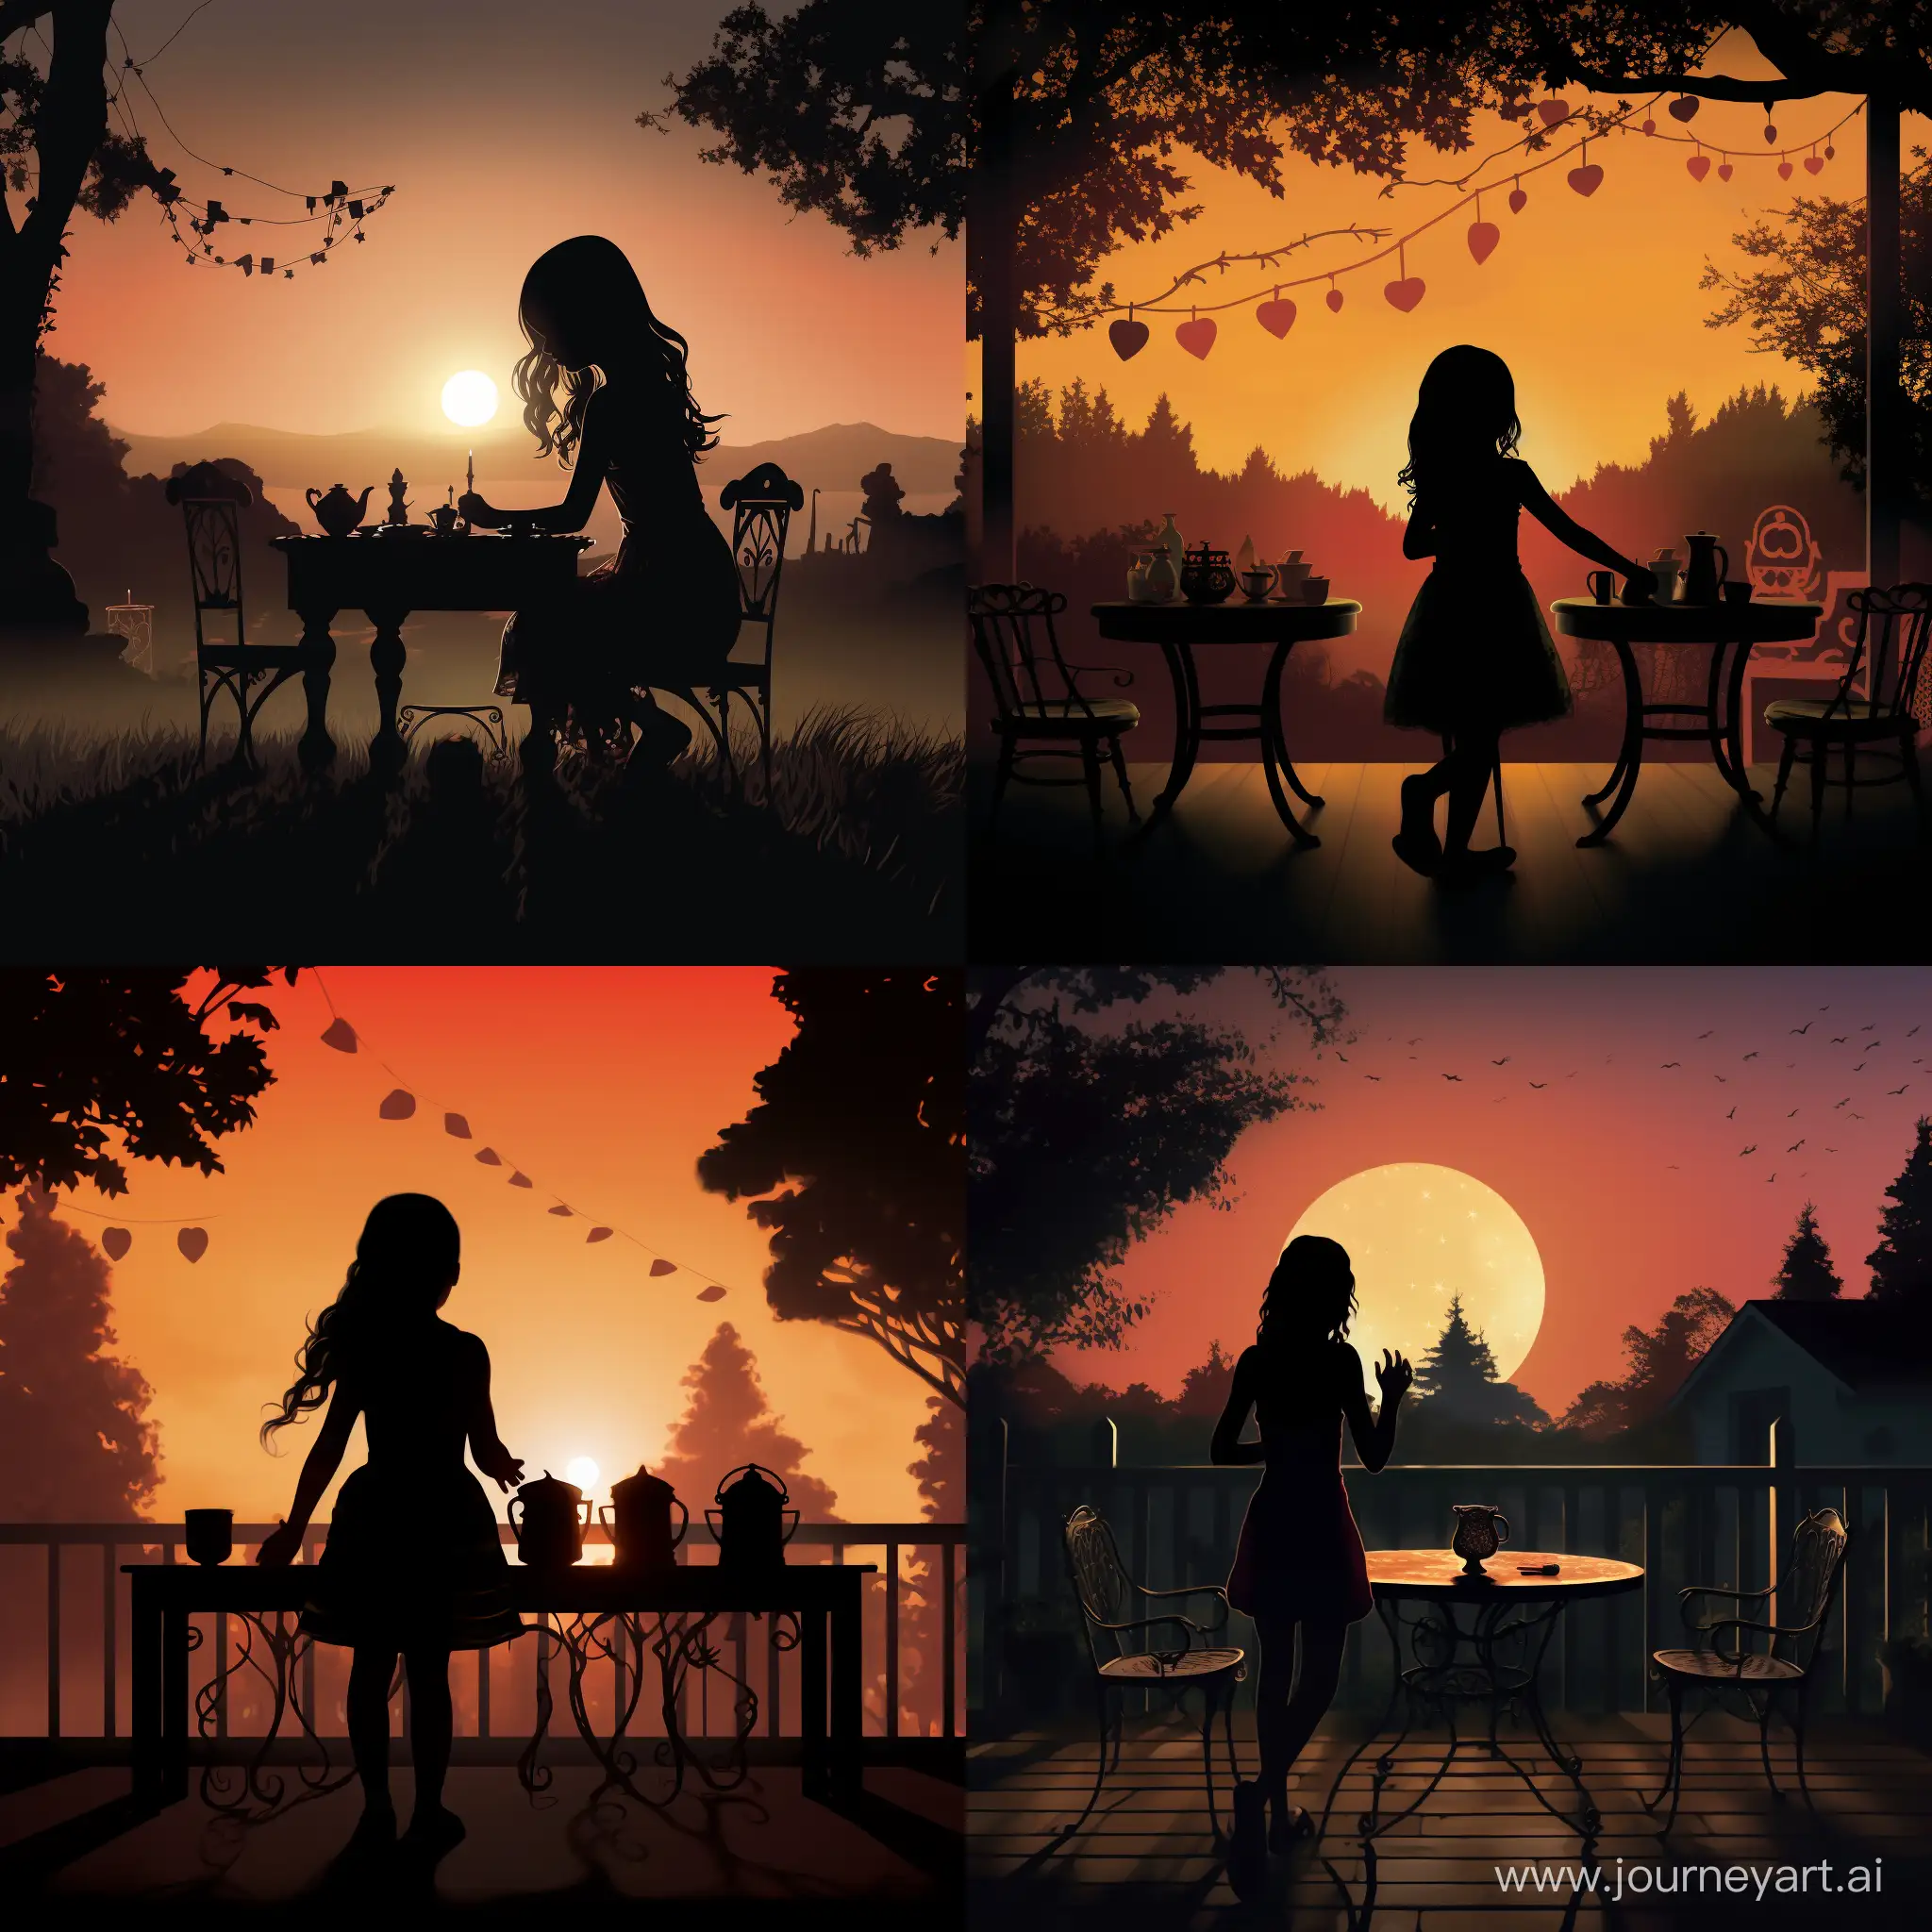 Joyful-Outdoor-Party-Games-Silhouette-of-a-Little-Girl-Engaged-in-Play